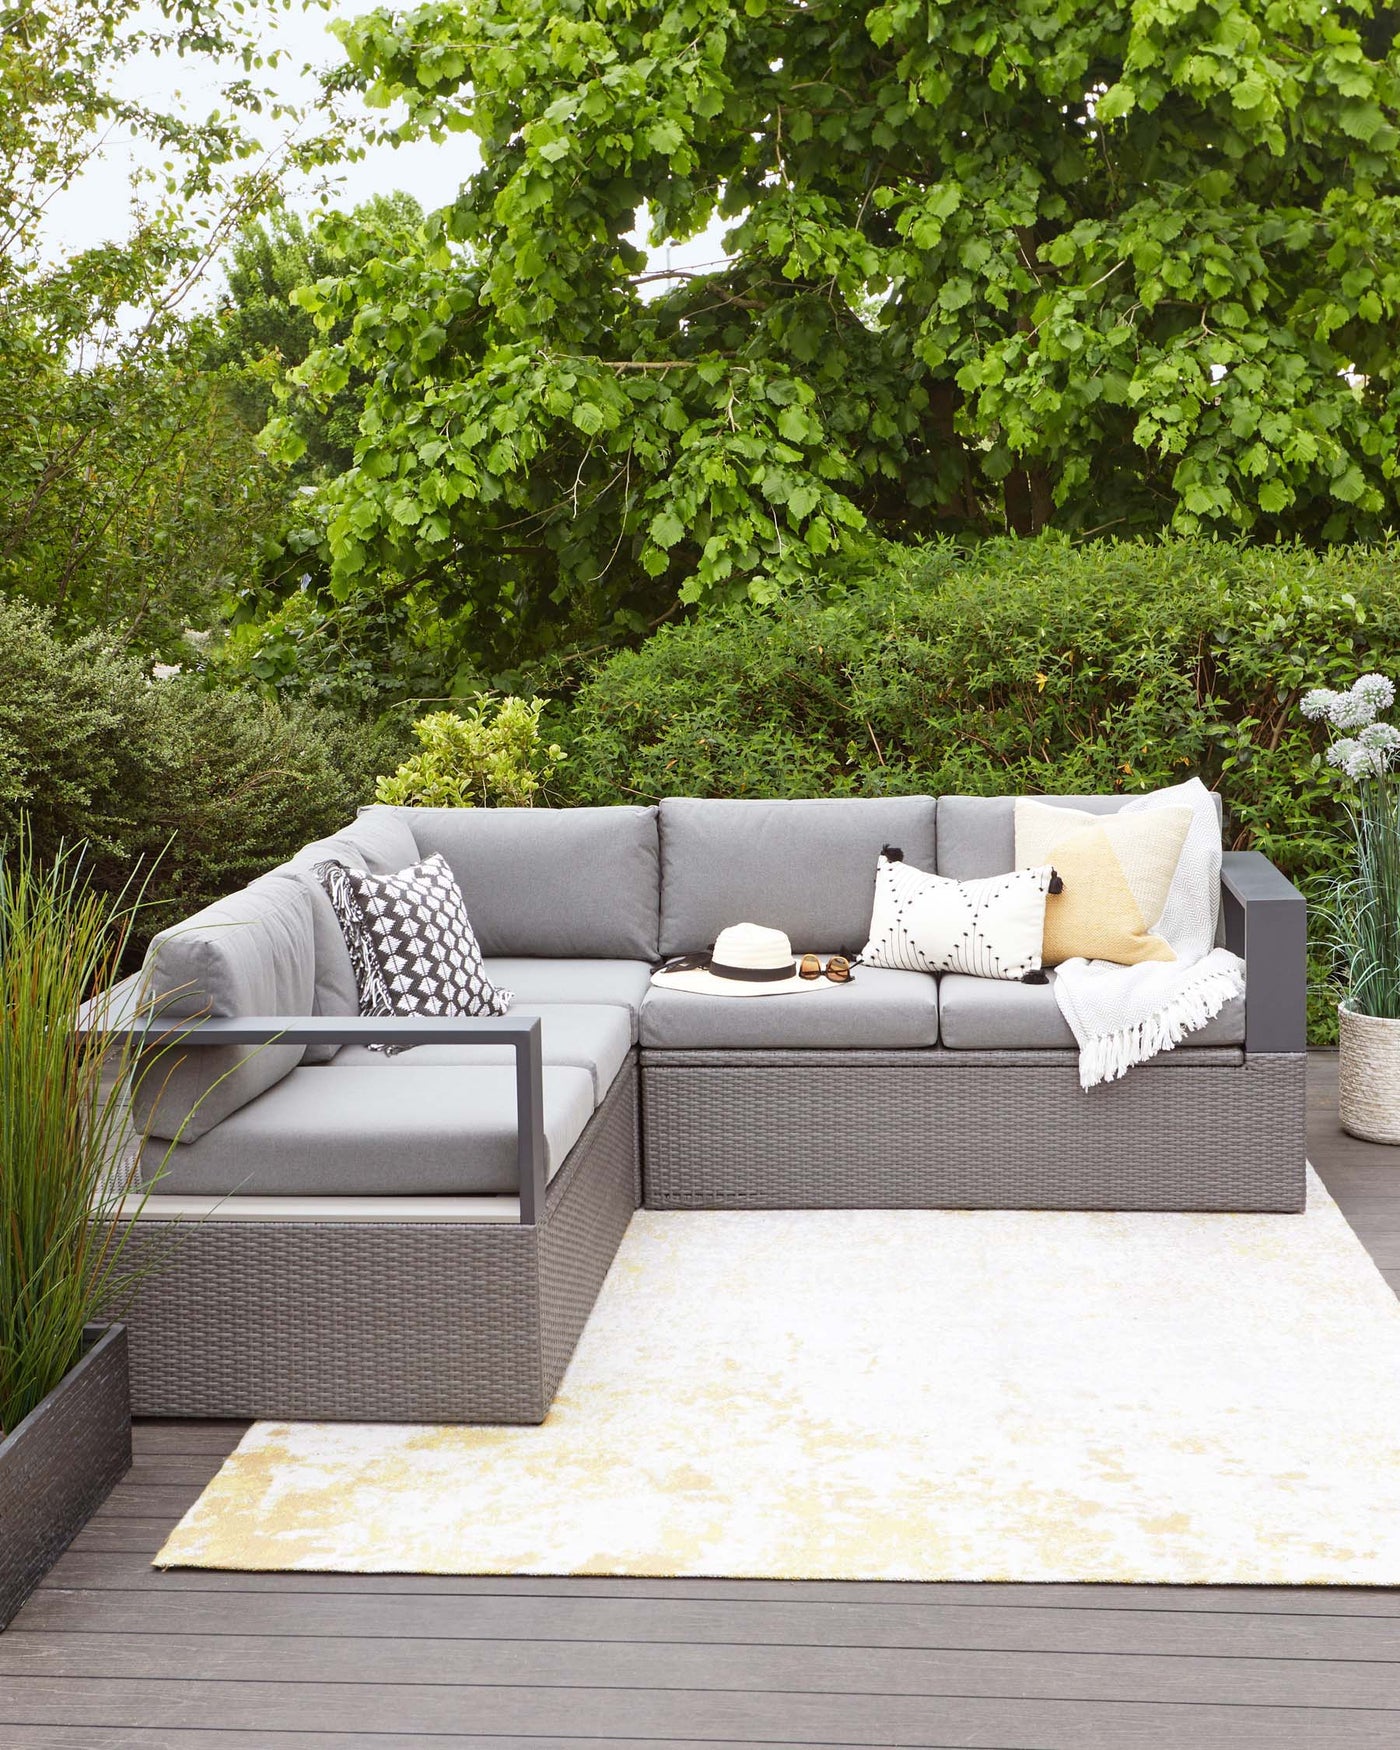 A modern outdoor sectional sofa with a chaise lounge in a woven grey resin wicker material, with thick light grey cushions. Coordinating decorative pillows in various patterns and a yellow accent are placed on the sofa. The furniture is situated on a cream and beige area rug, laid on a grey wooden decking. Set against a backdrop of lush greenery, the arrangement creates an inviting outdoor living space.